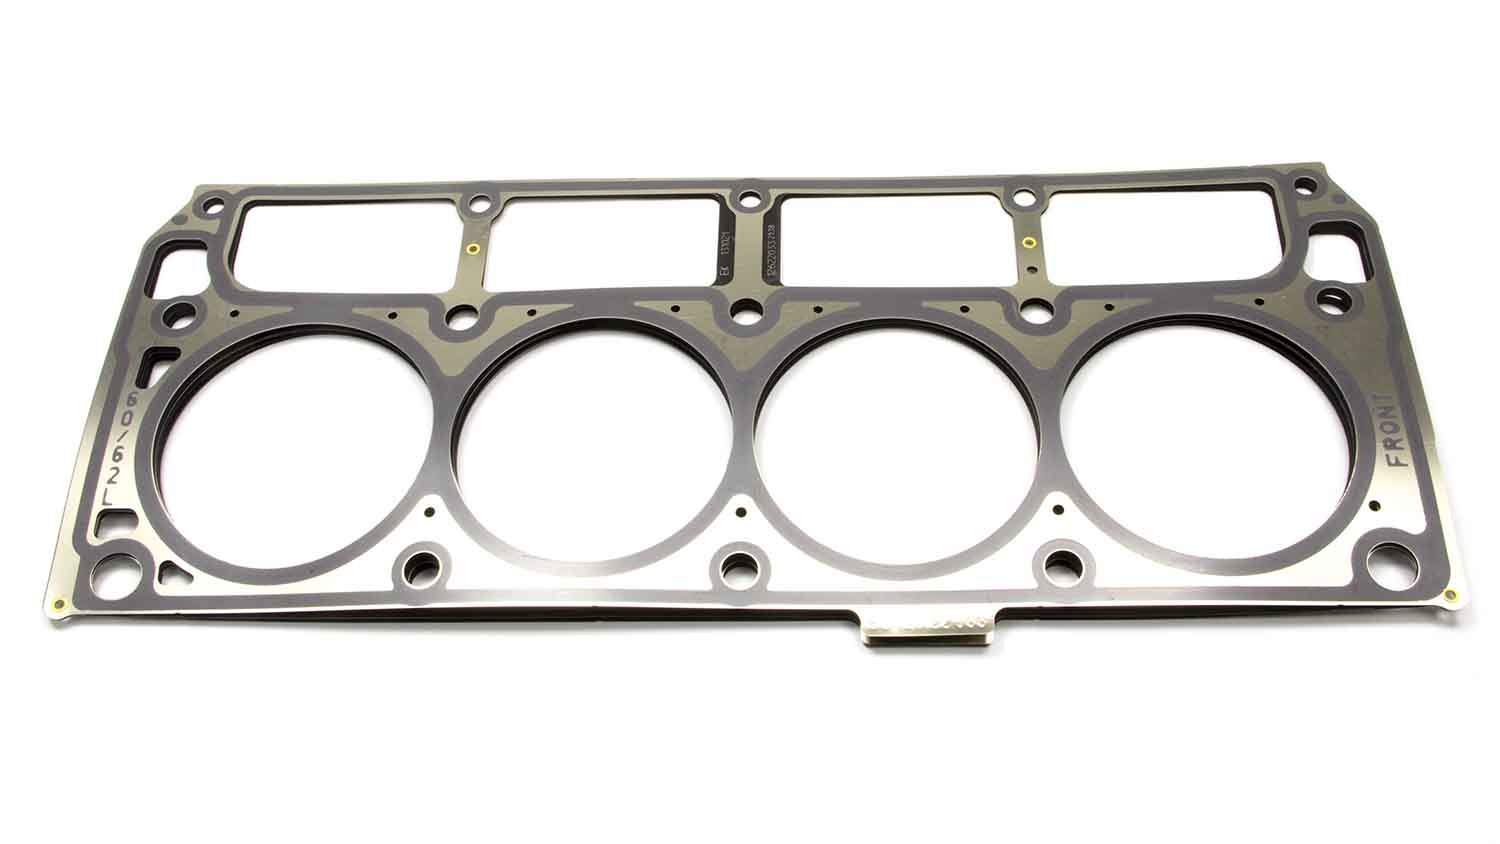 GM Performance, Cylinder Head Gasket,  4.100" Bore,  0.051" Compression Thickness,  Multi-Layered Steel,  GM LS-Series,  Each